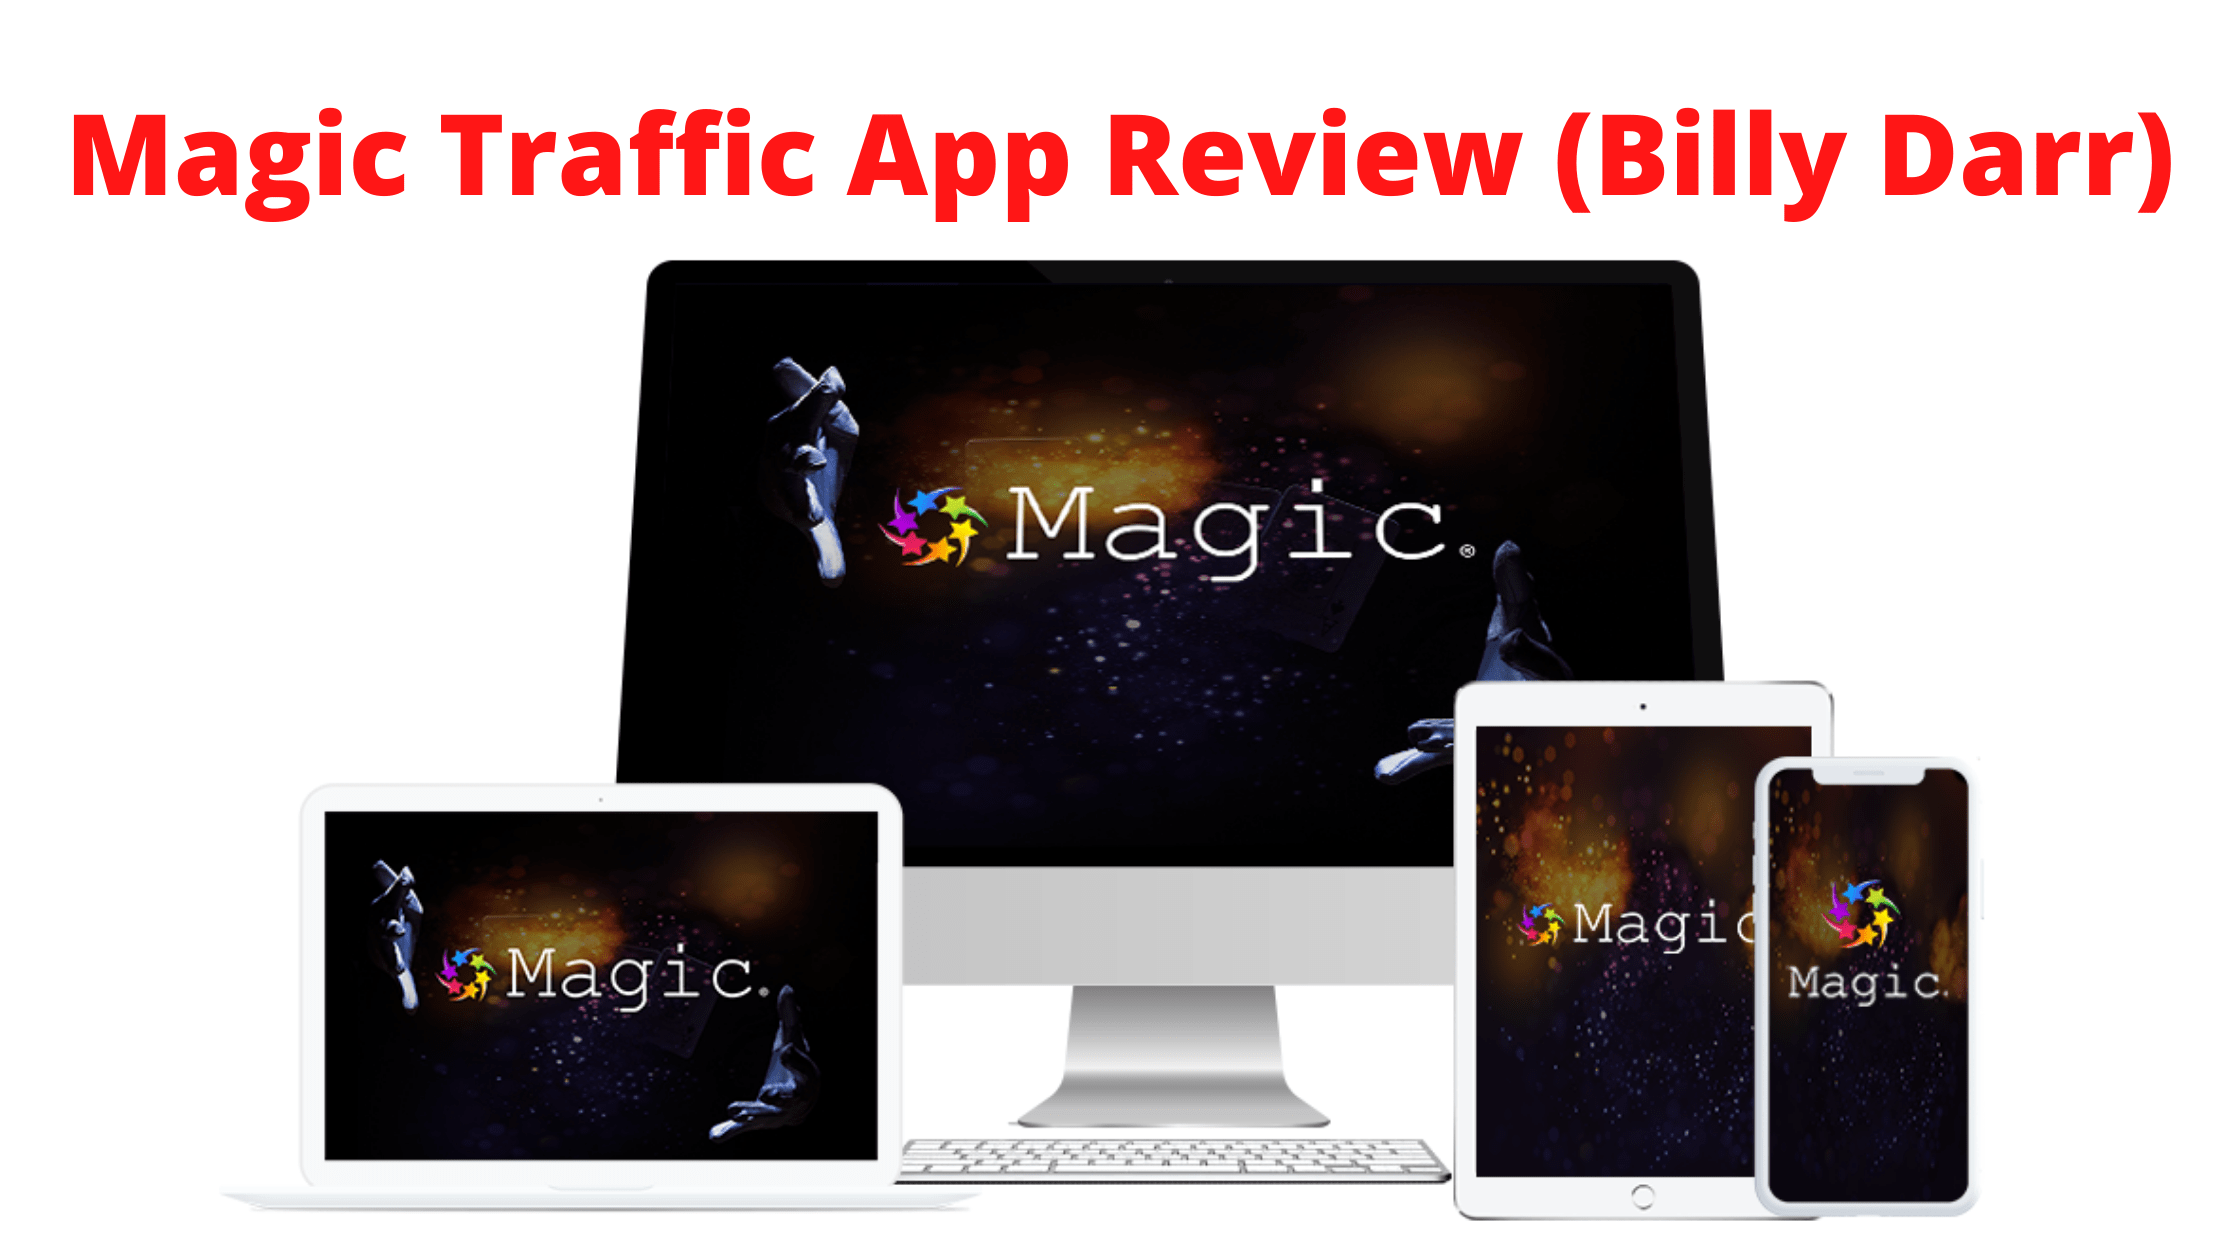 Magic Mobile Traffic App Review (Billy Darr)